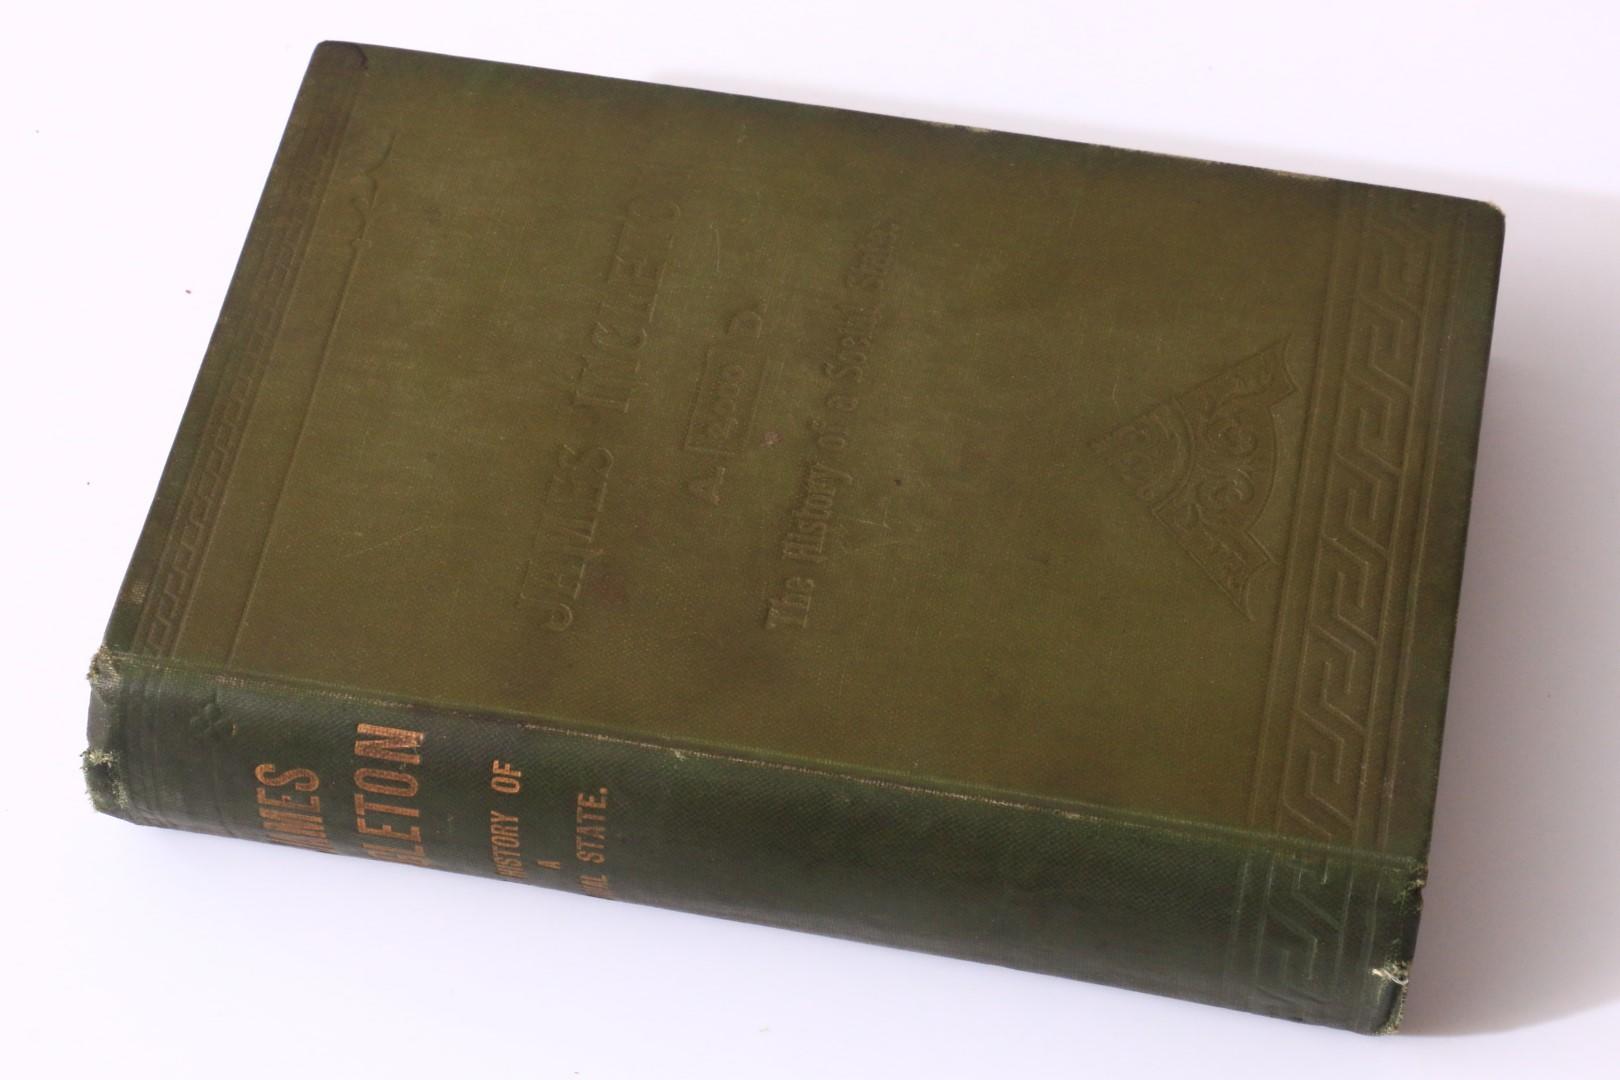 Mr. Dick - James Ingleton: The History of a Social State: 2000AD. - James Blackwood, n.d. [1893], First Edition.